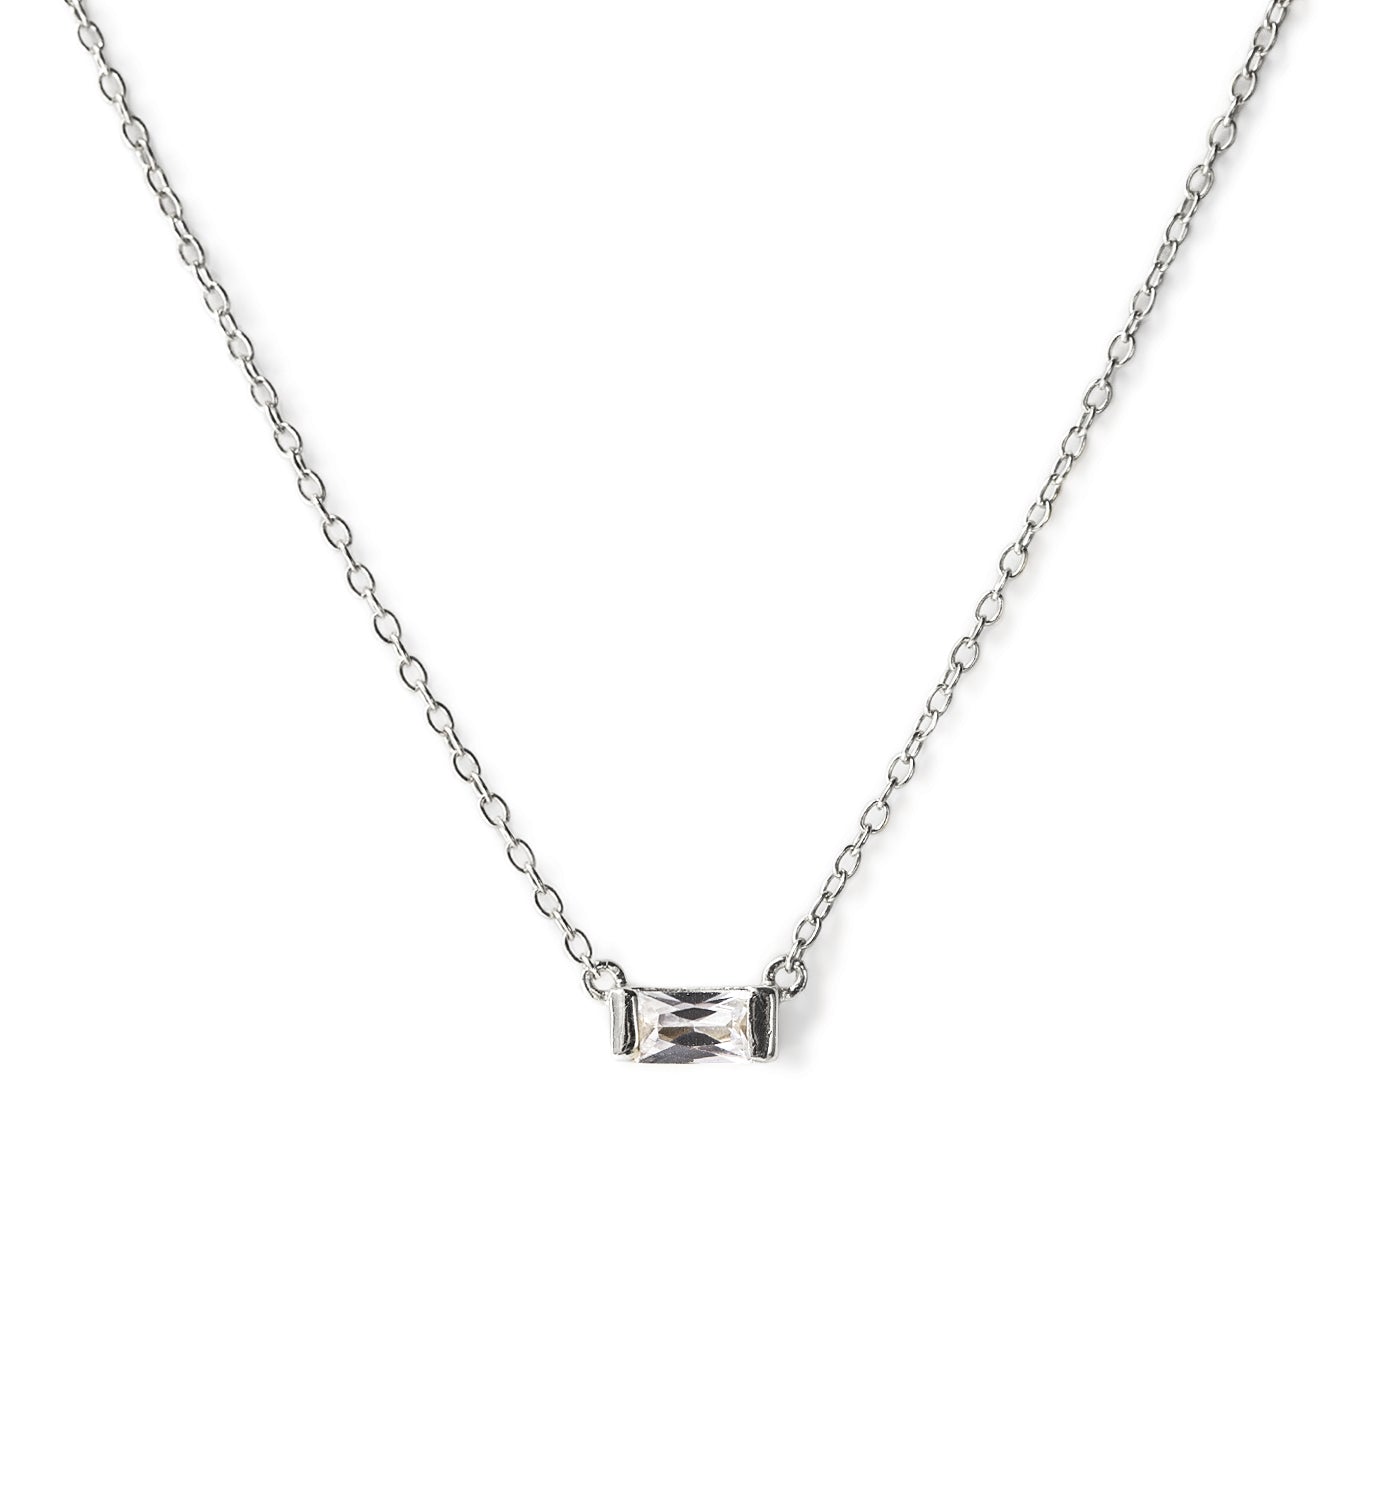 Sofia Baguette Necklace, Necklaces - AMY O. Jewelry